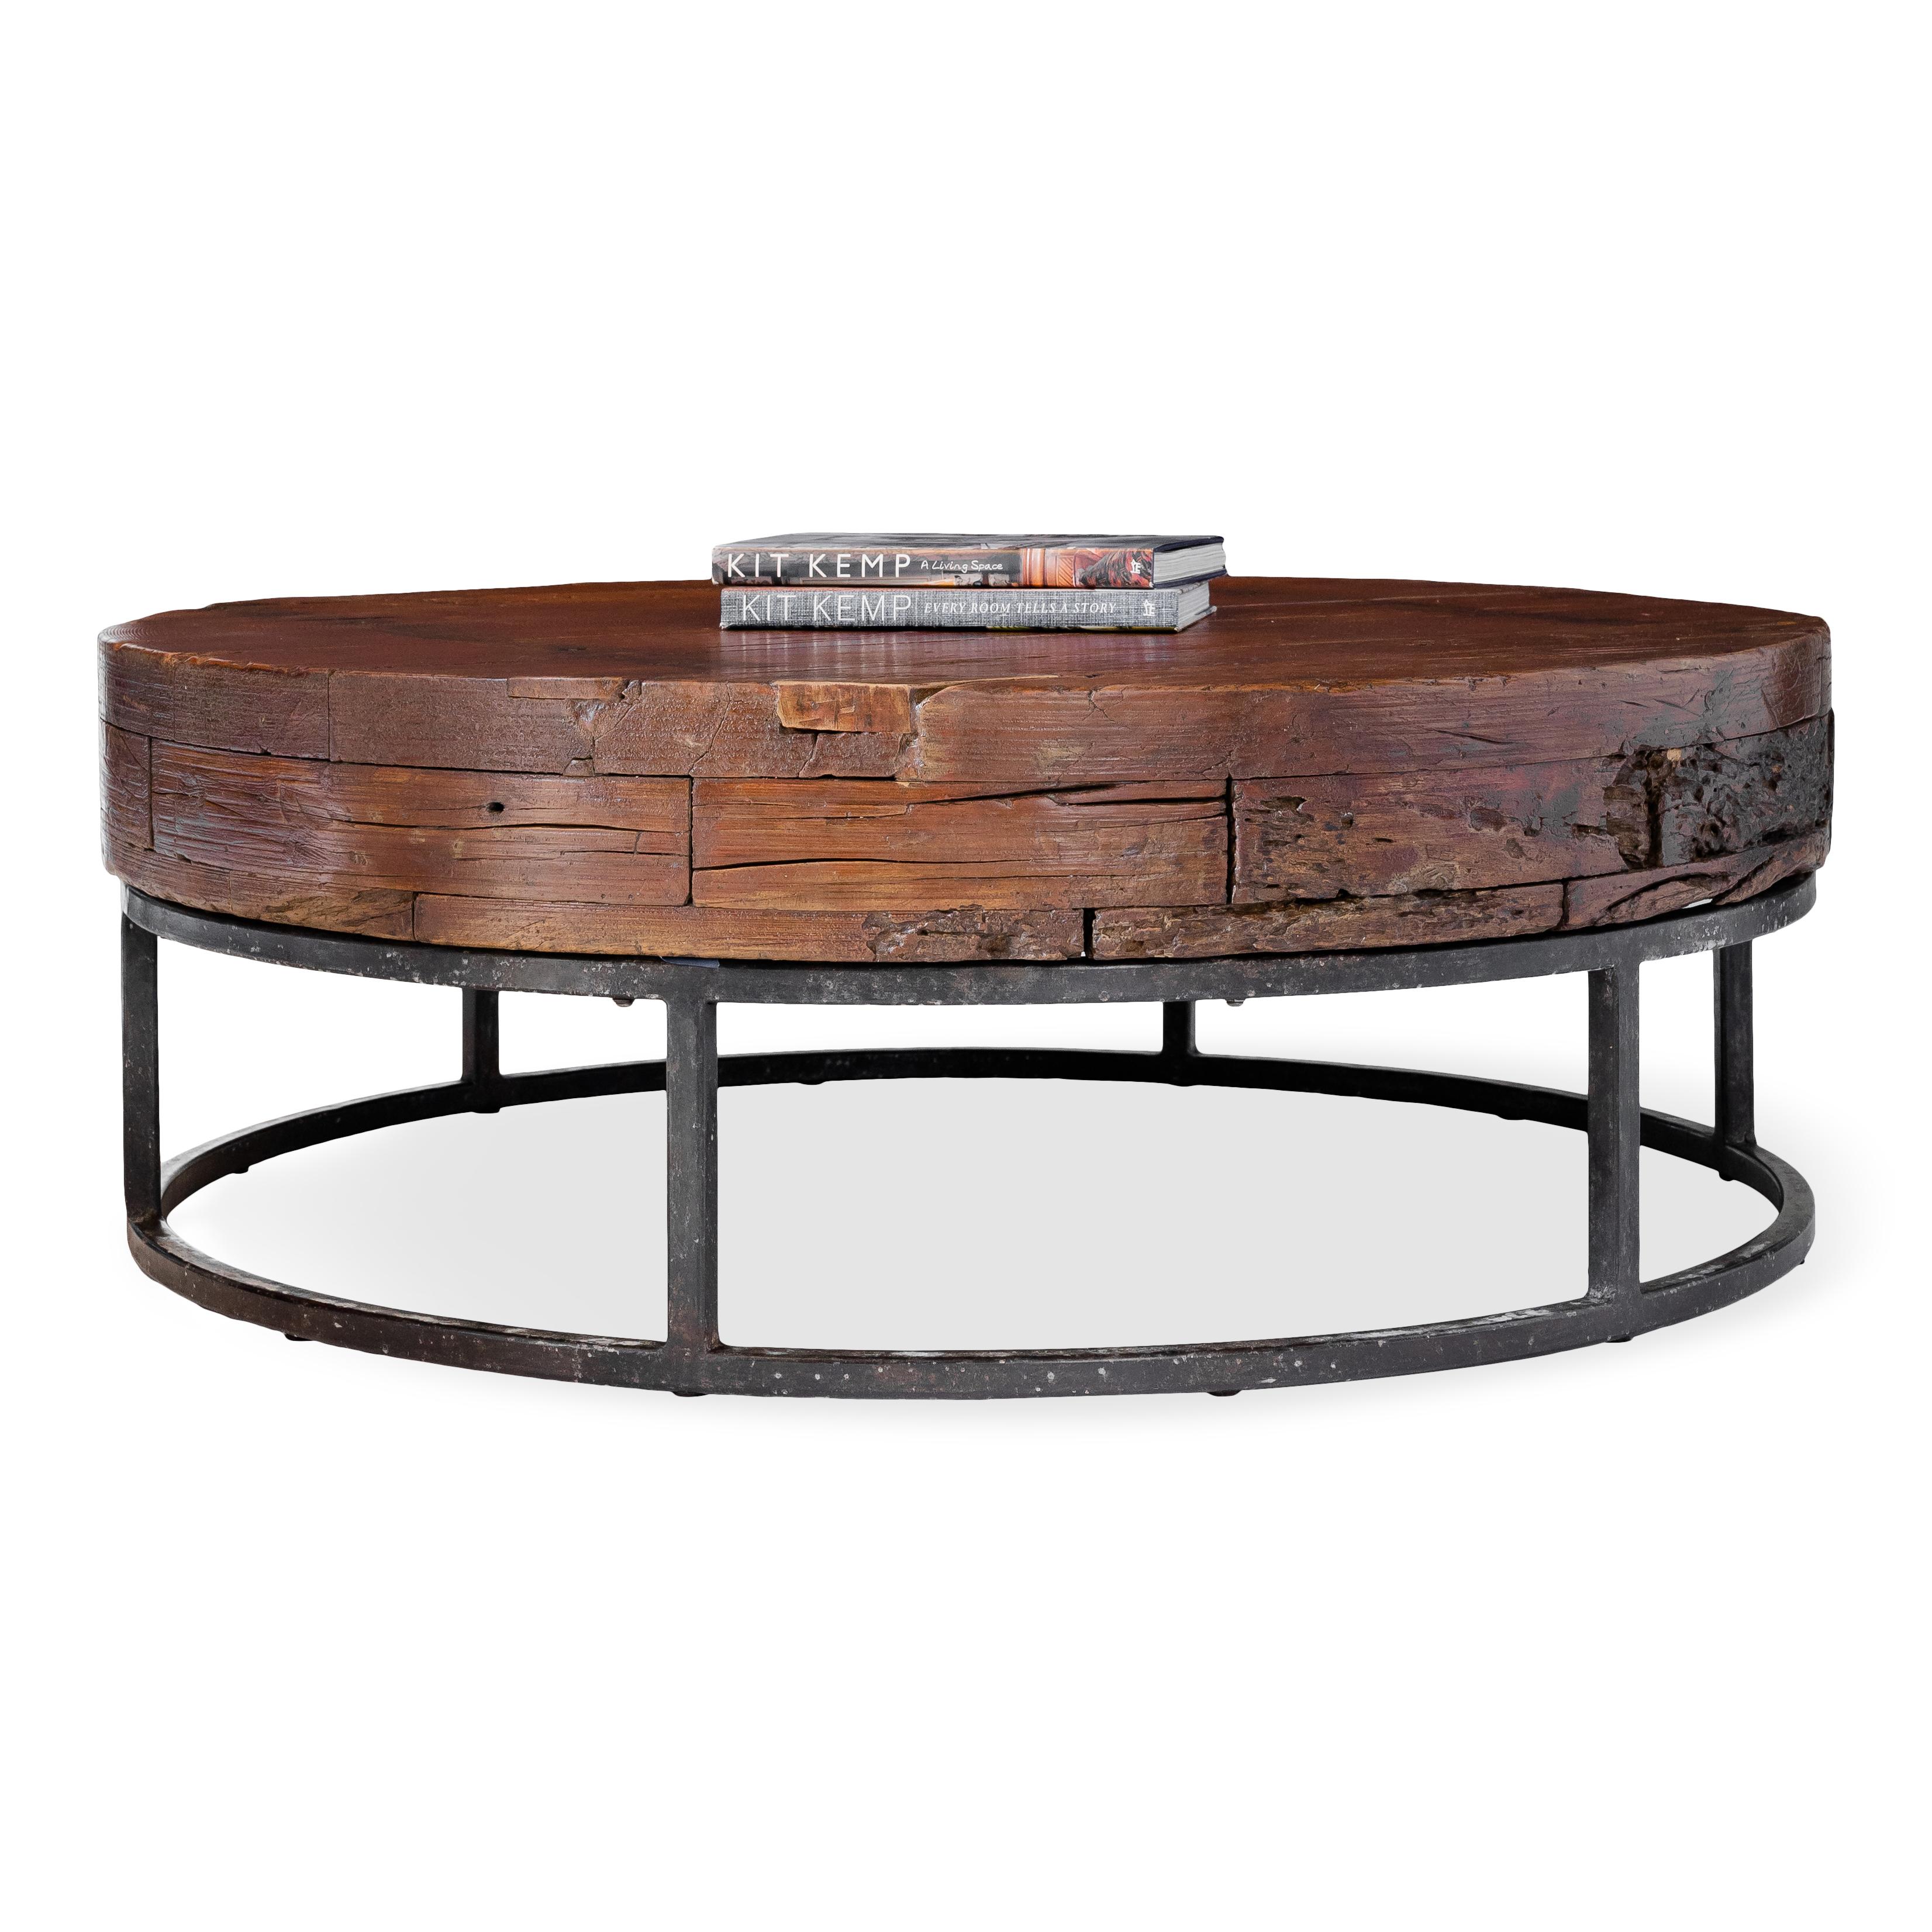 Wooden colonial industrial mold as coffee table with metal base.

This piece is a part of Brendan Bass’s one-of-a-kind collection, Le Monde. French for “The World”, the Le Monde collection is made up of rare and hard to find pieces curated by